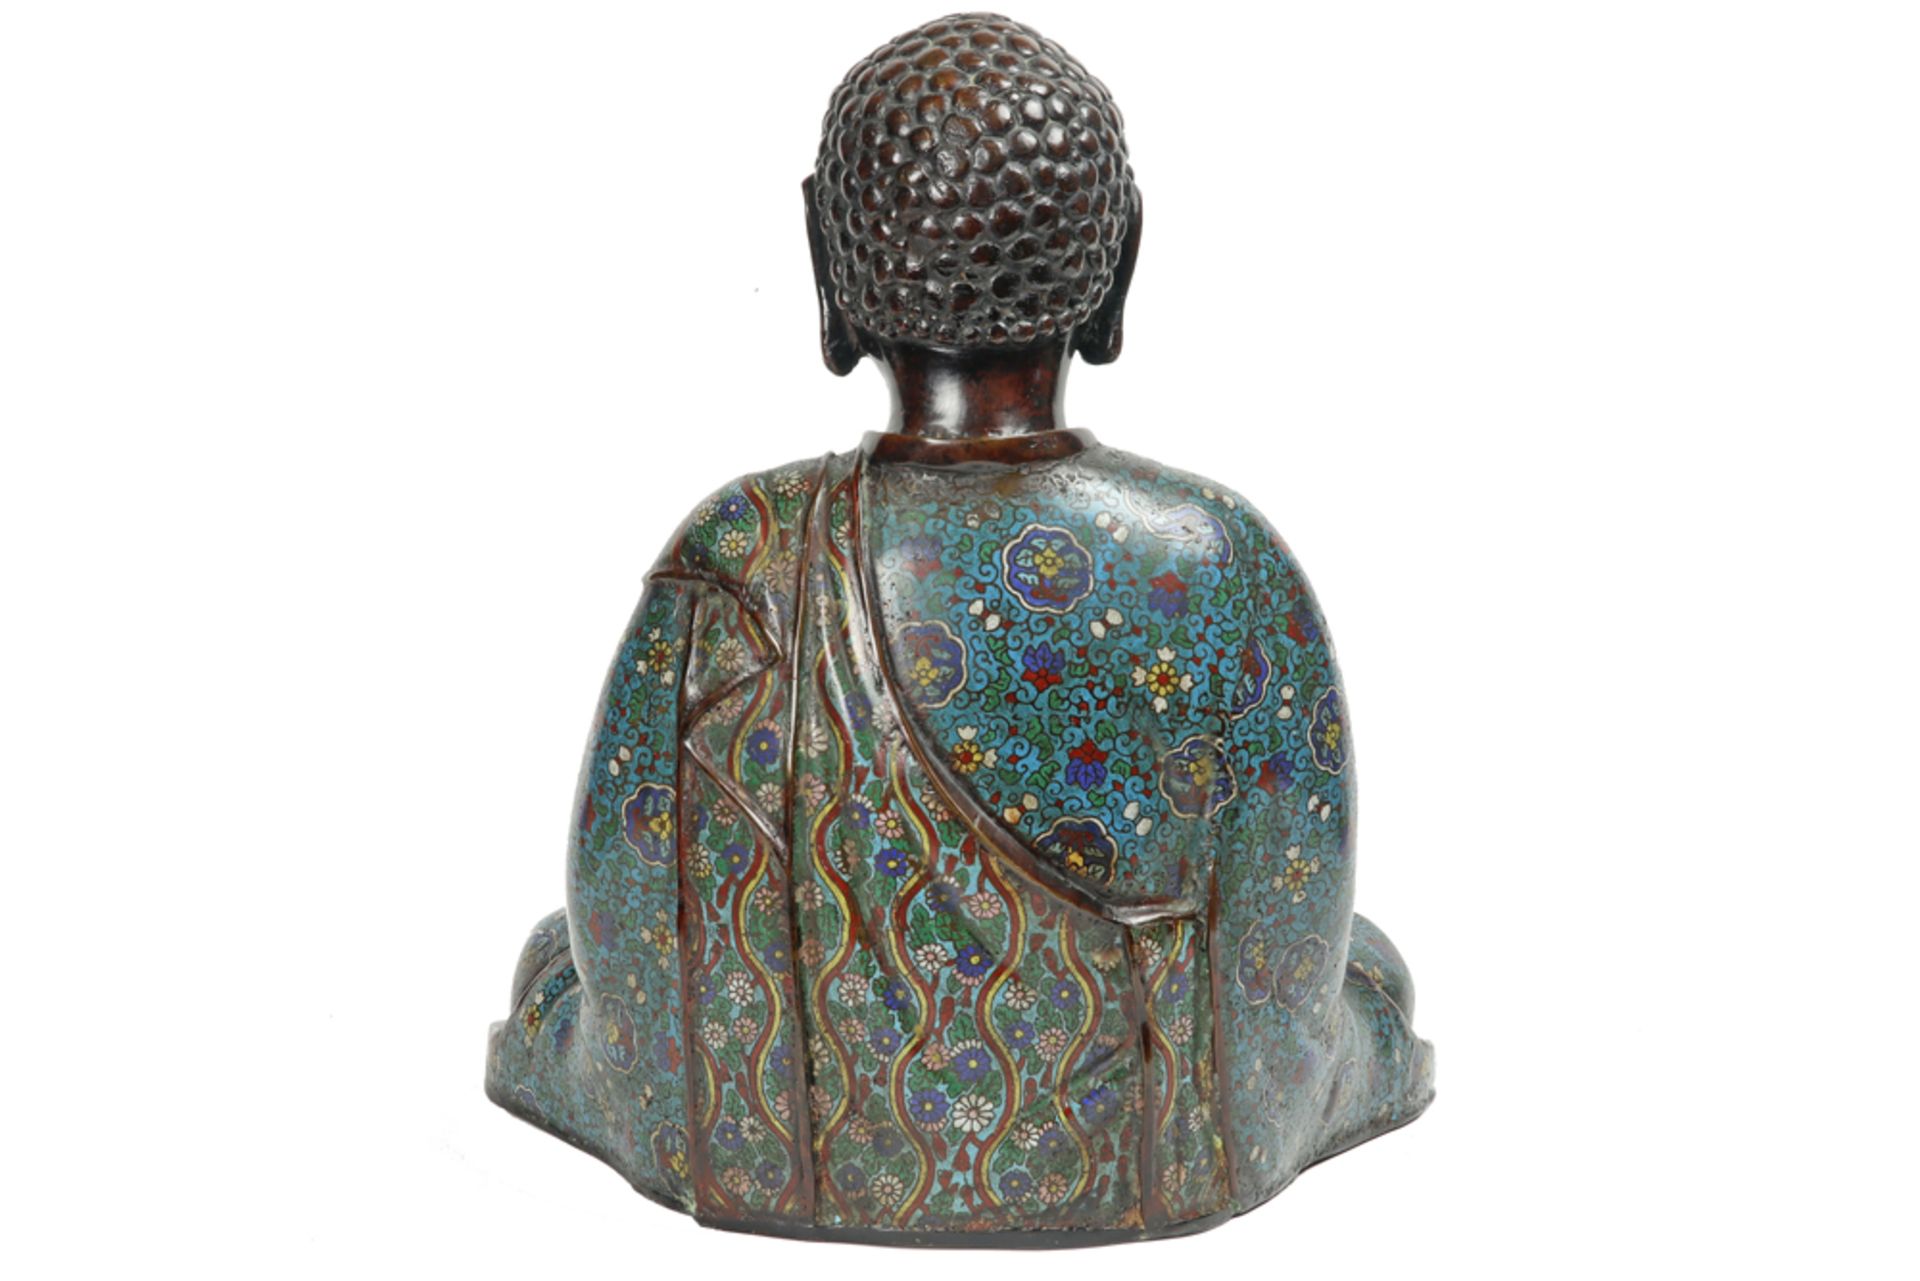 antique presumably Japanese 18th Cent. (Edo period) "Meditating Buddha" sculpture in bronze and - Image 4 of 4